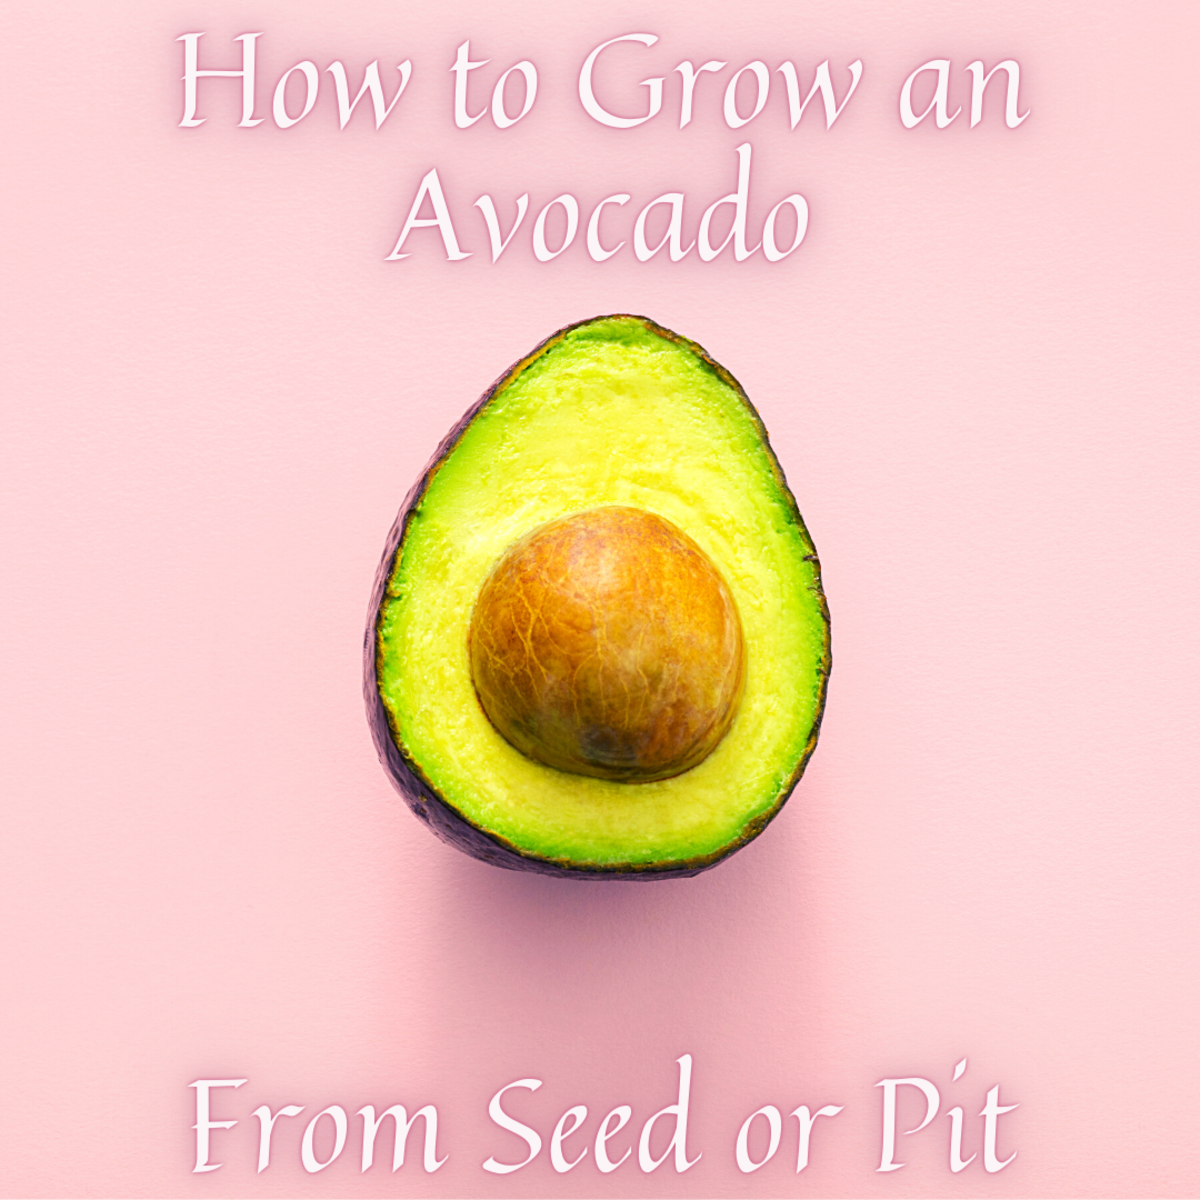 How to Grow Avocado From Seed or Pit